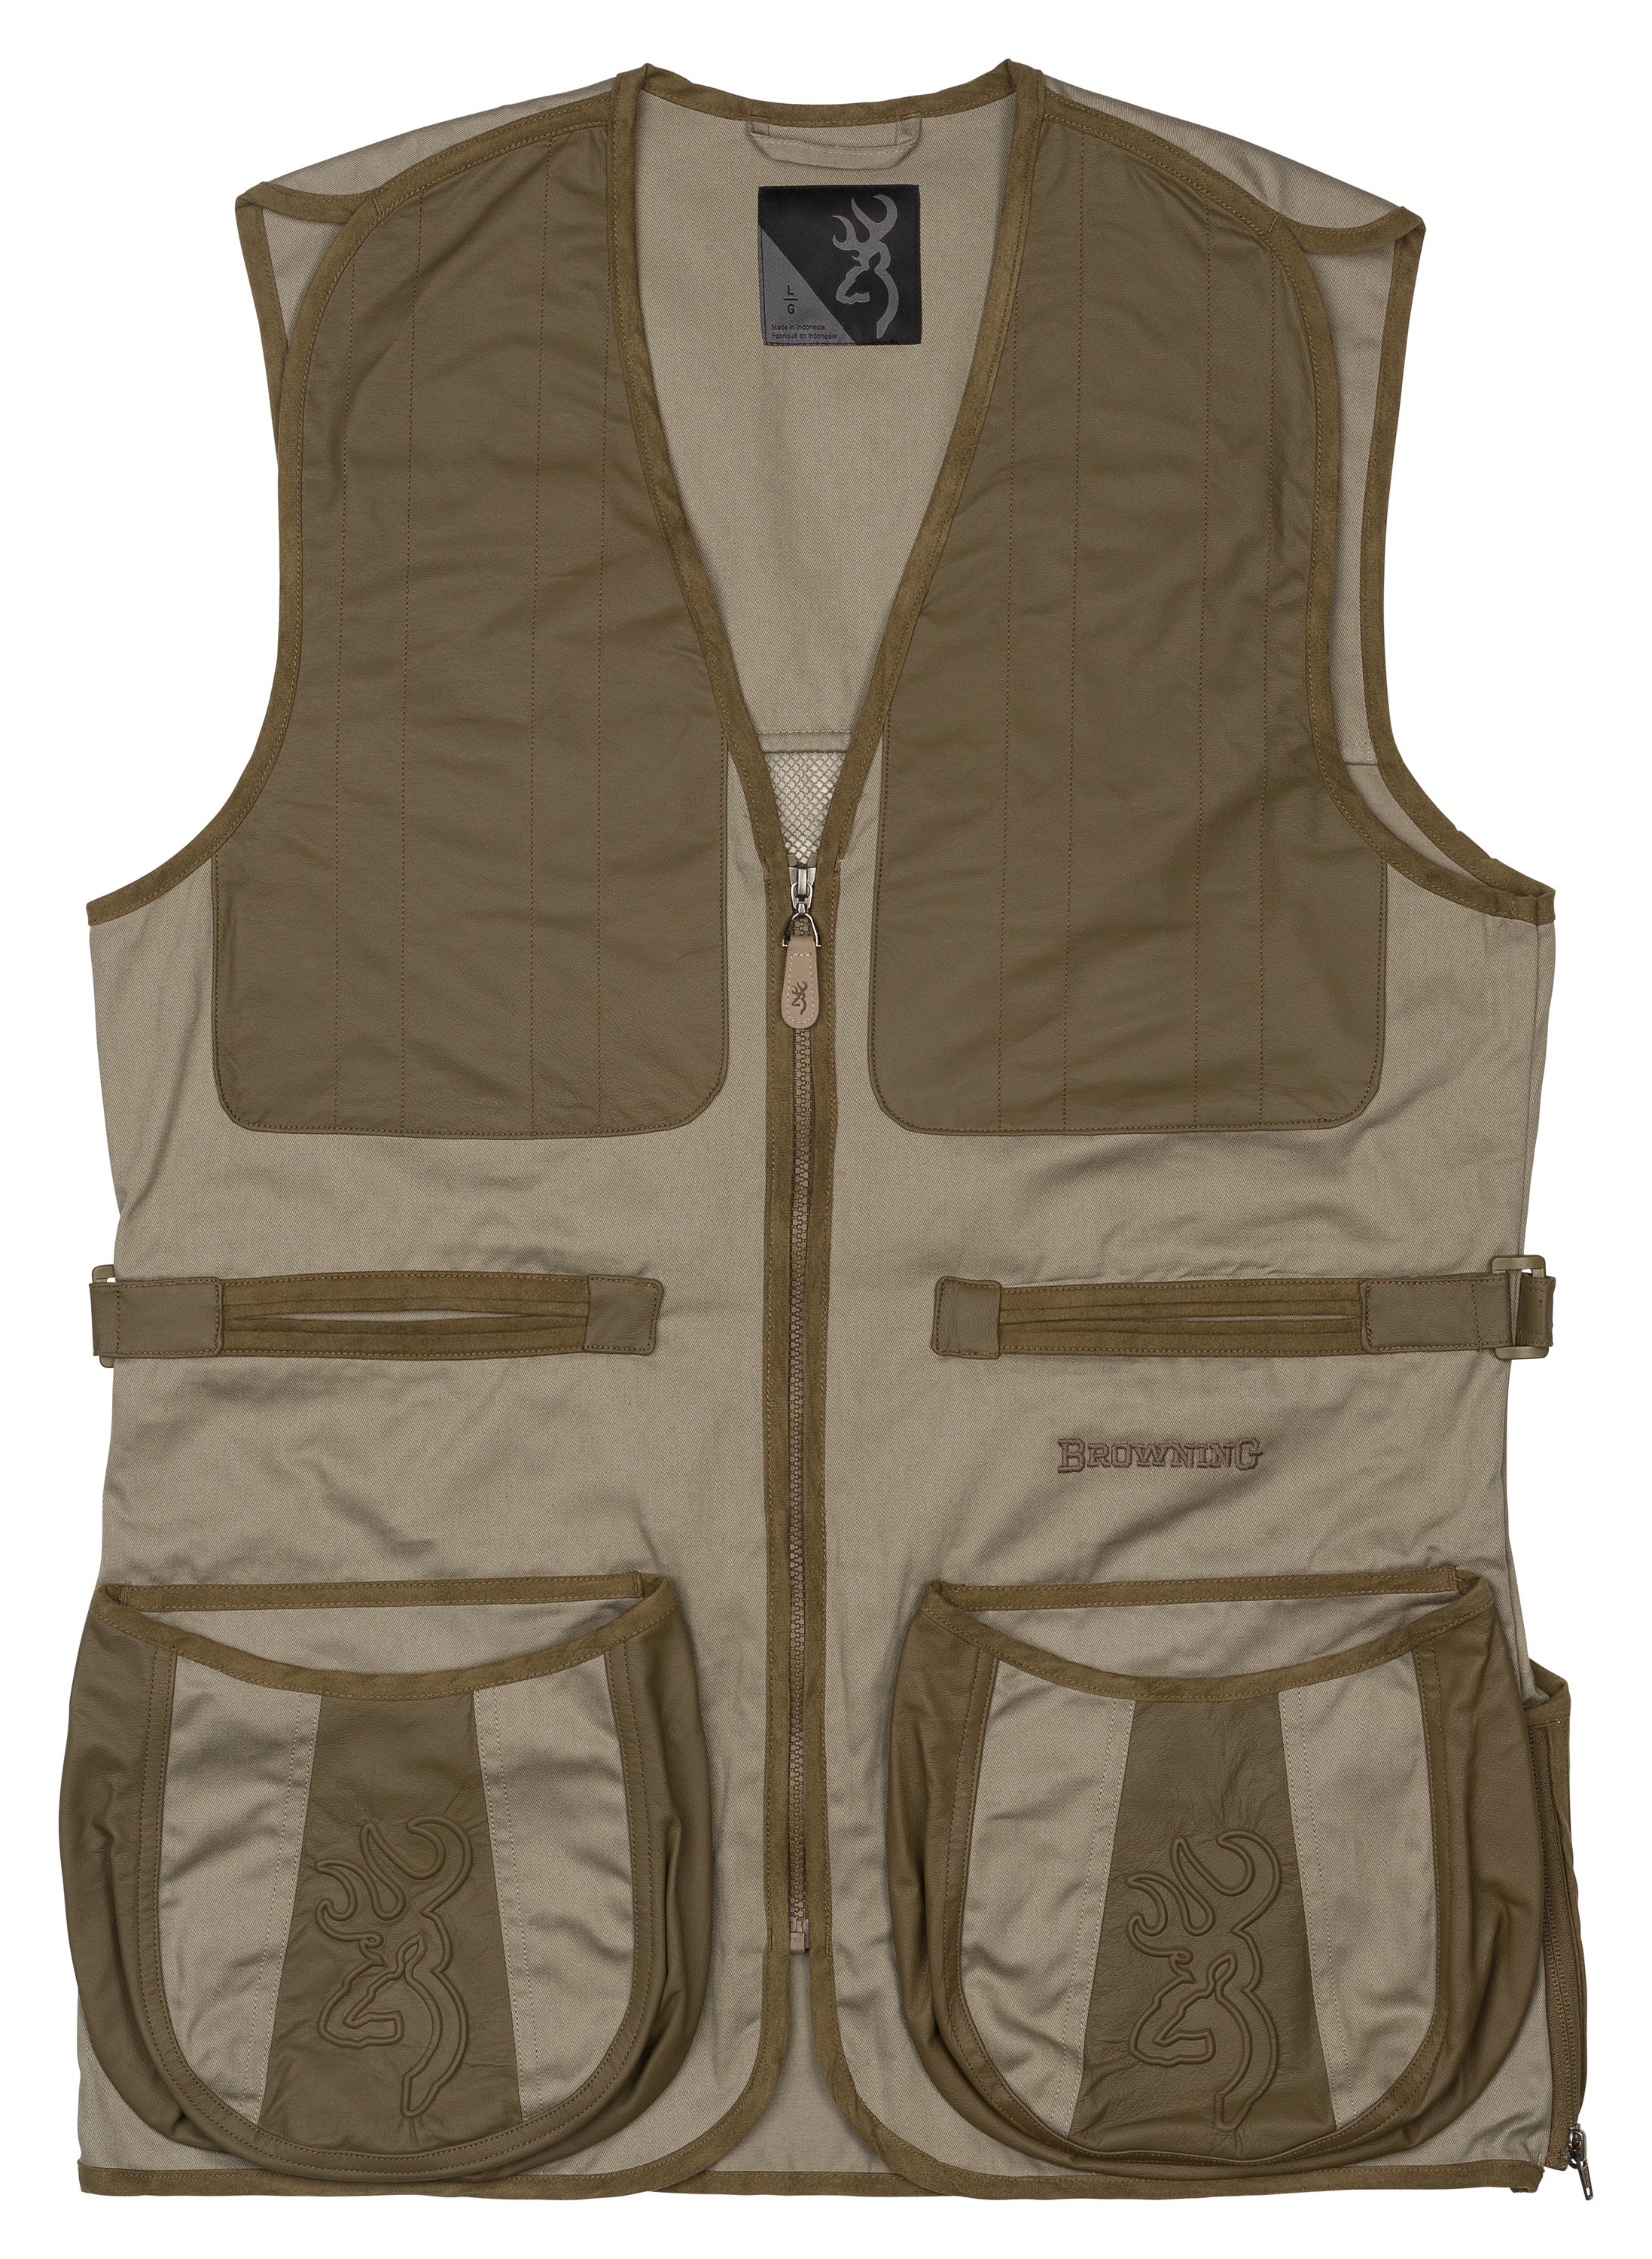 Browning Vest Ace Shooting Black/Red